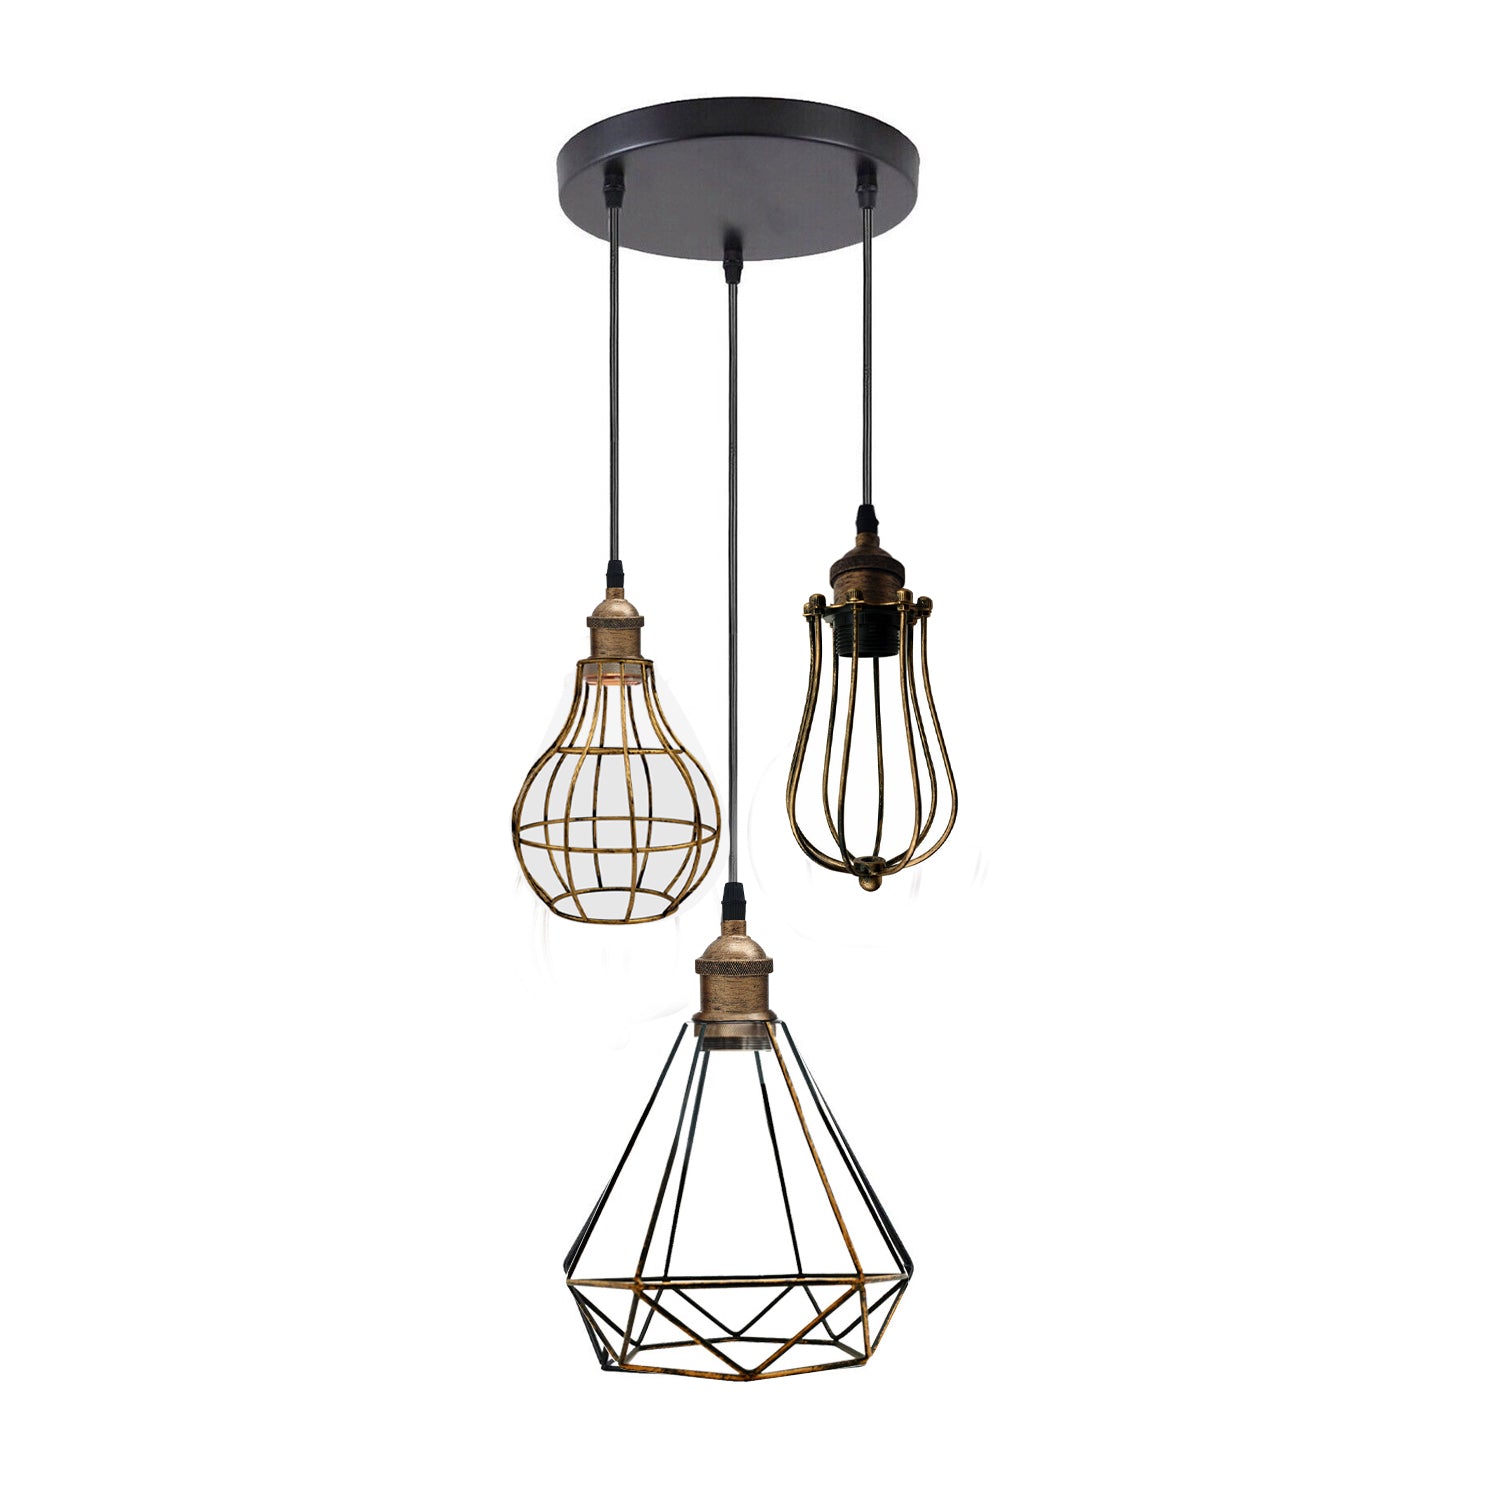 3 Light Cage Ceiling Hanging Pendant Lamp